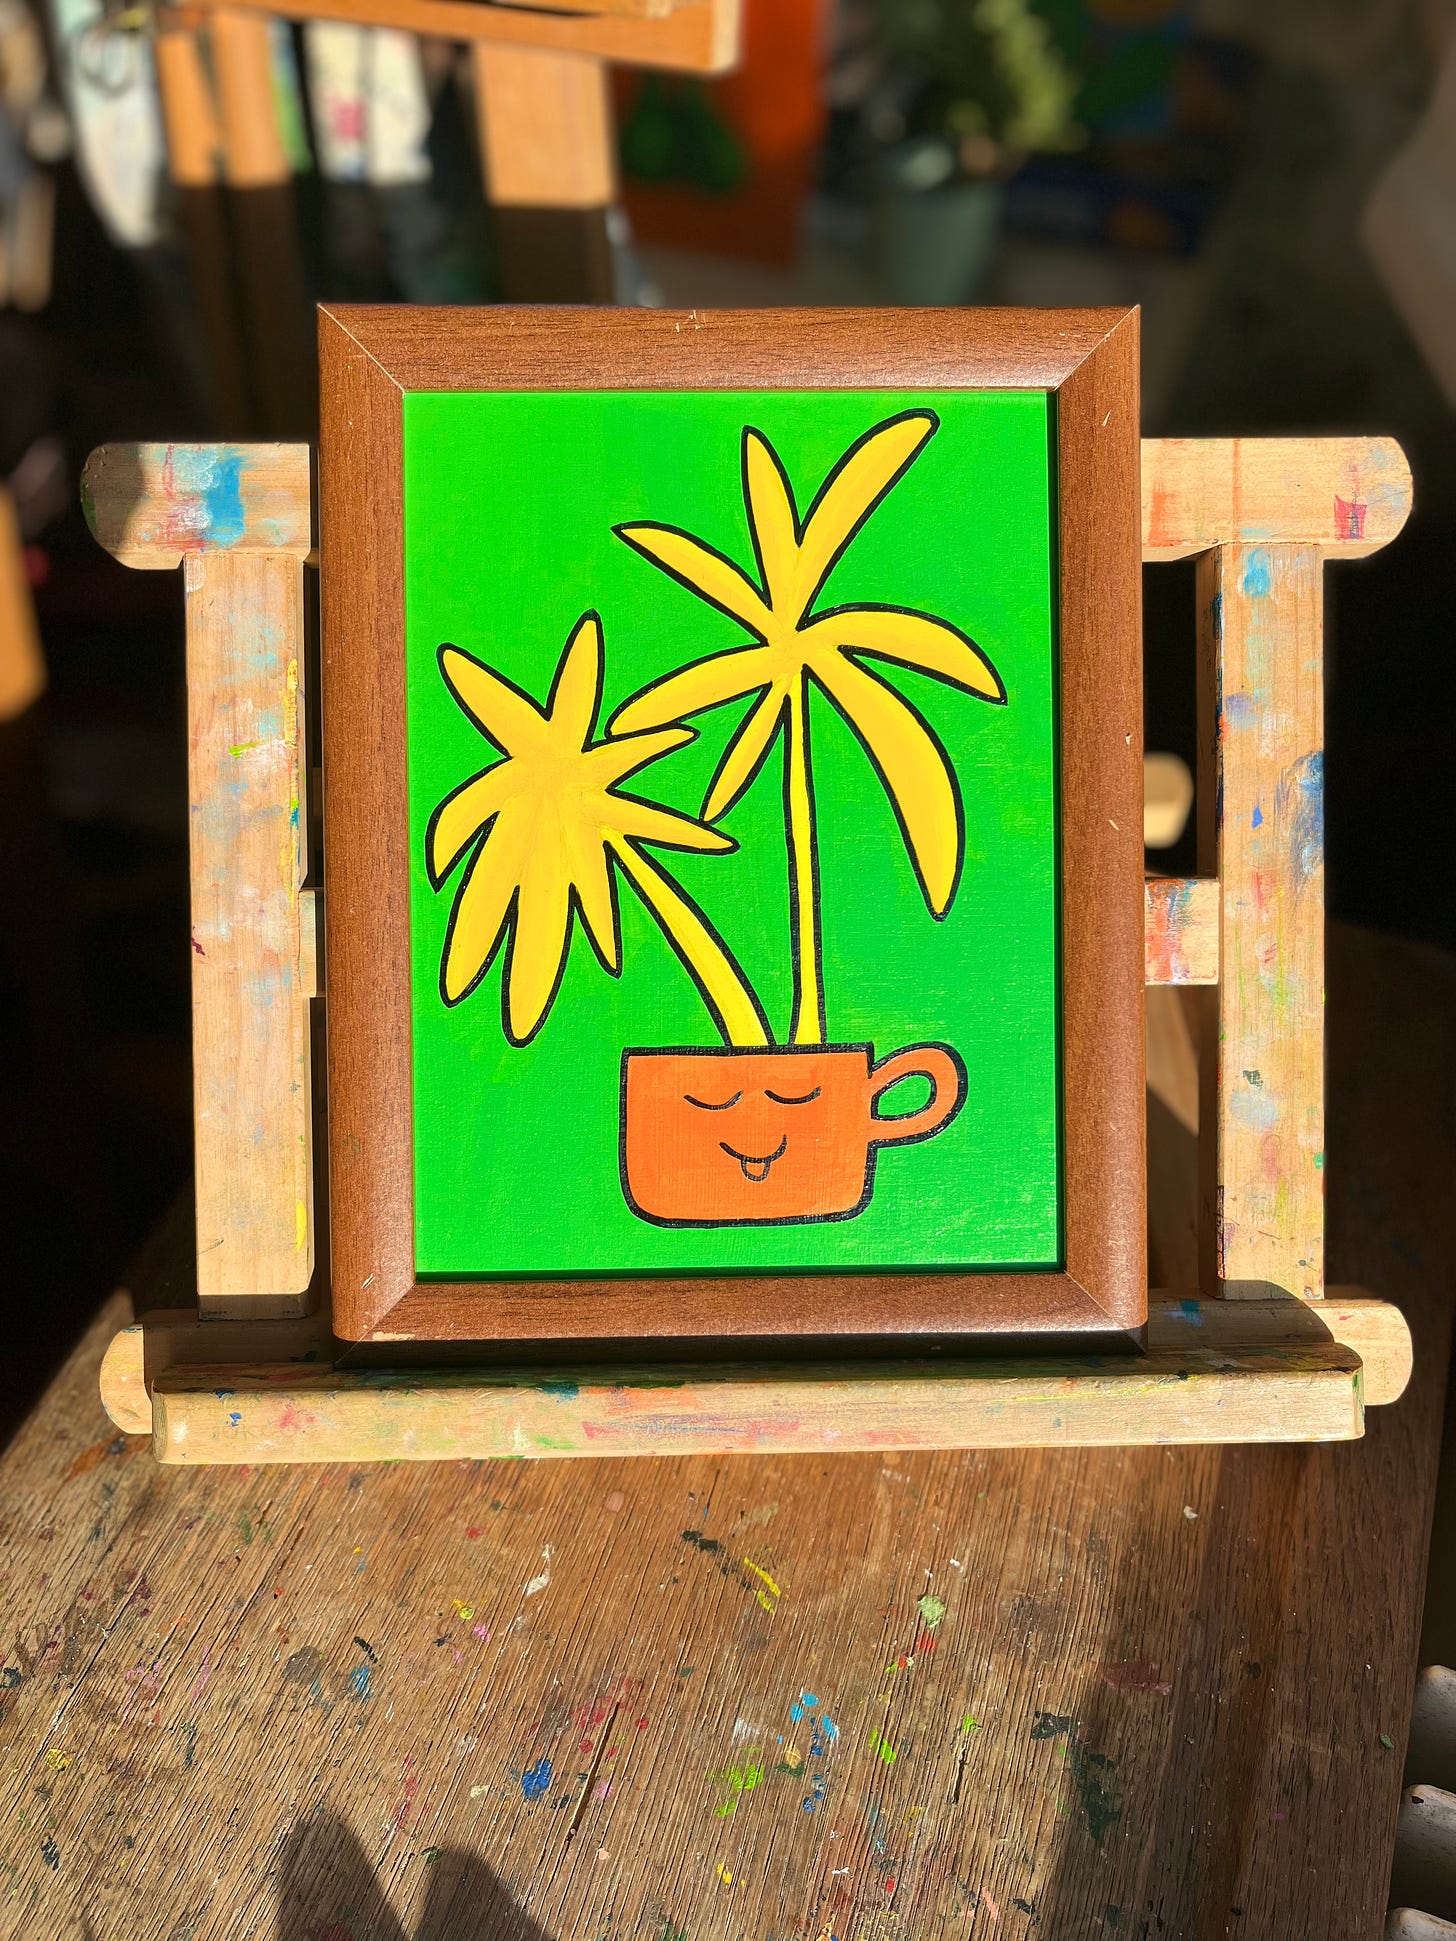 Two yellow plants in an orange mug on a green background